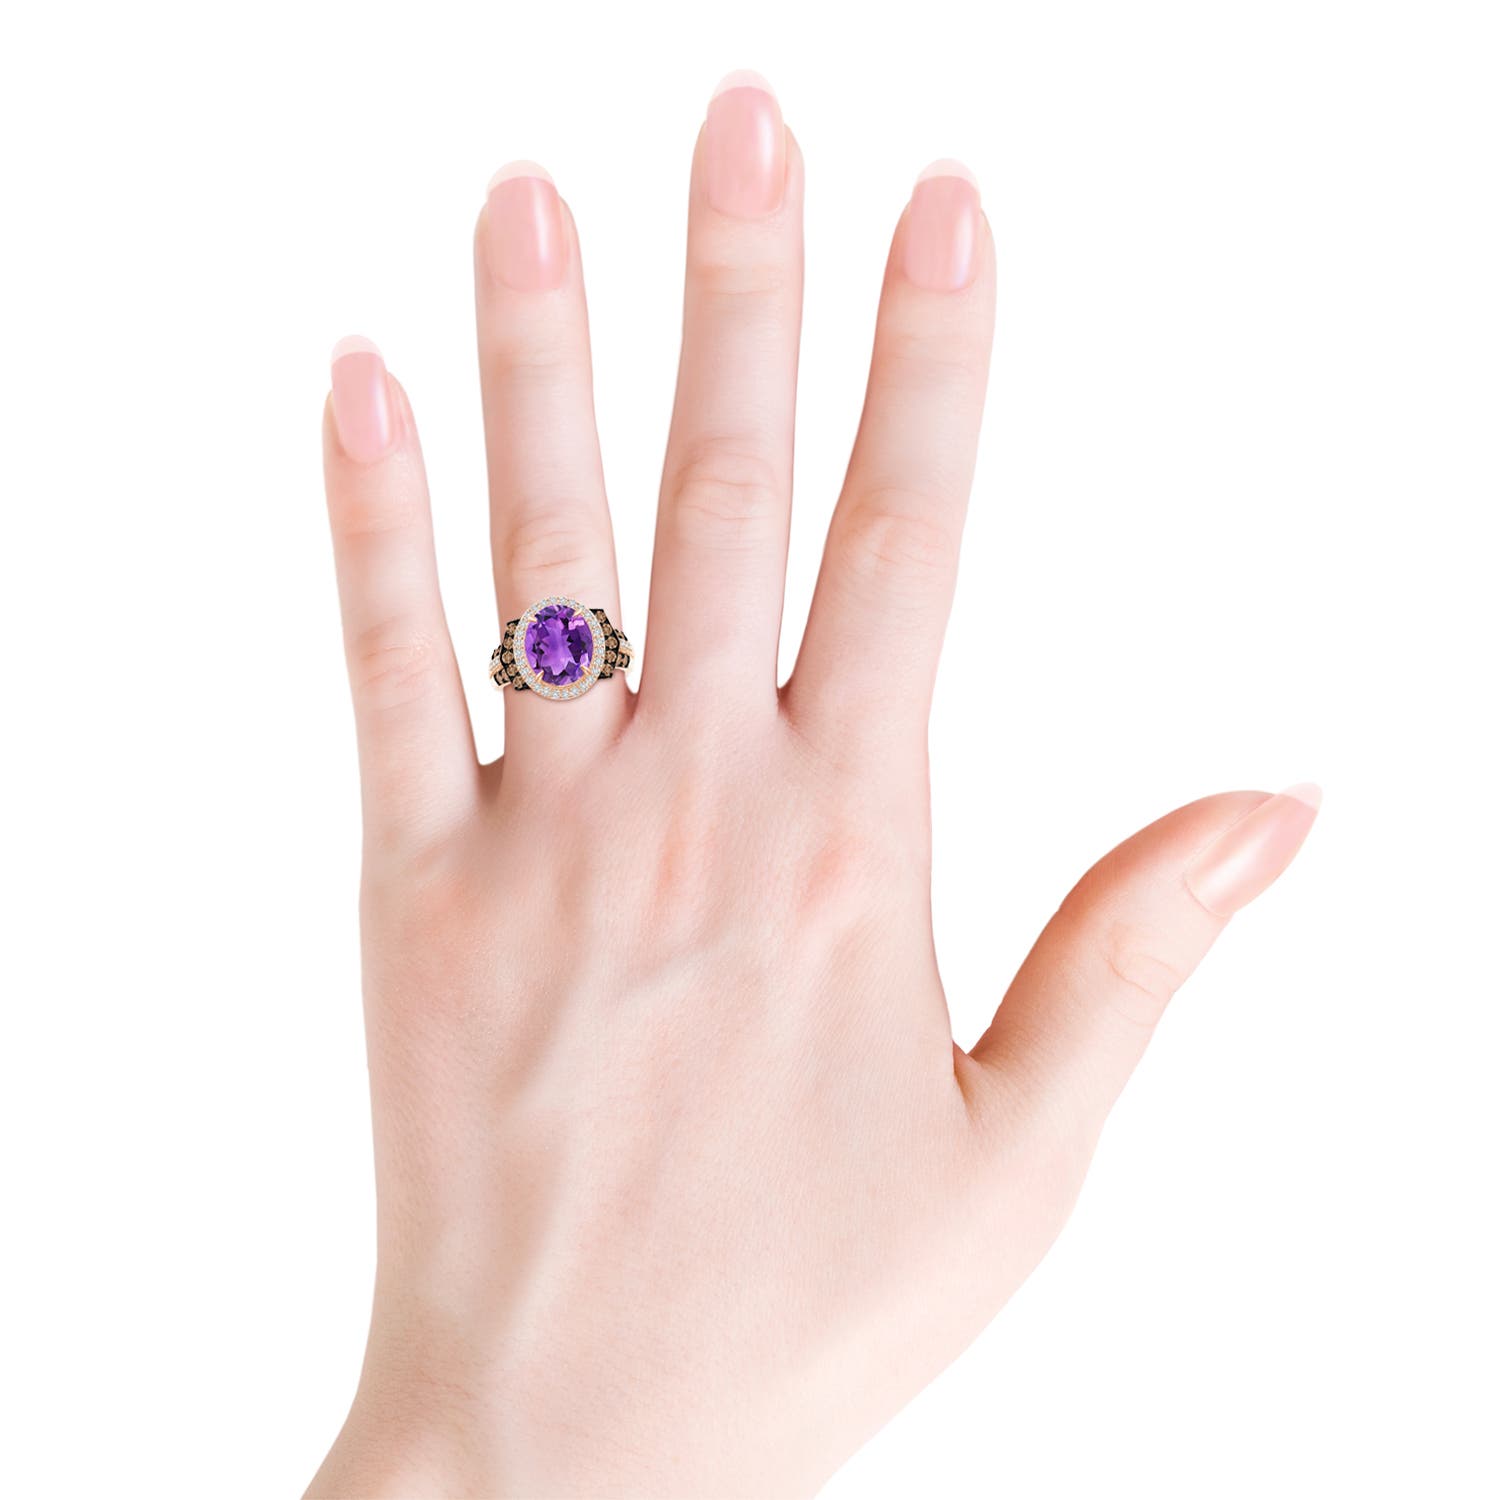 AAA - Amethyst / 3.8 CT / 14 KT Rose Gold